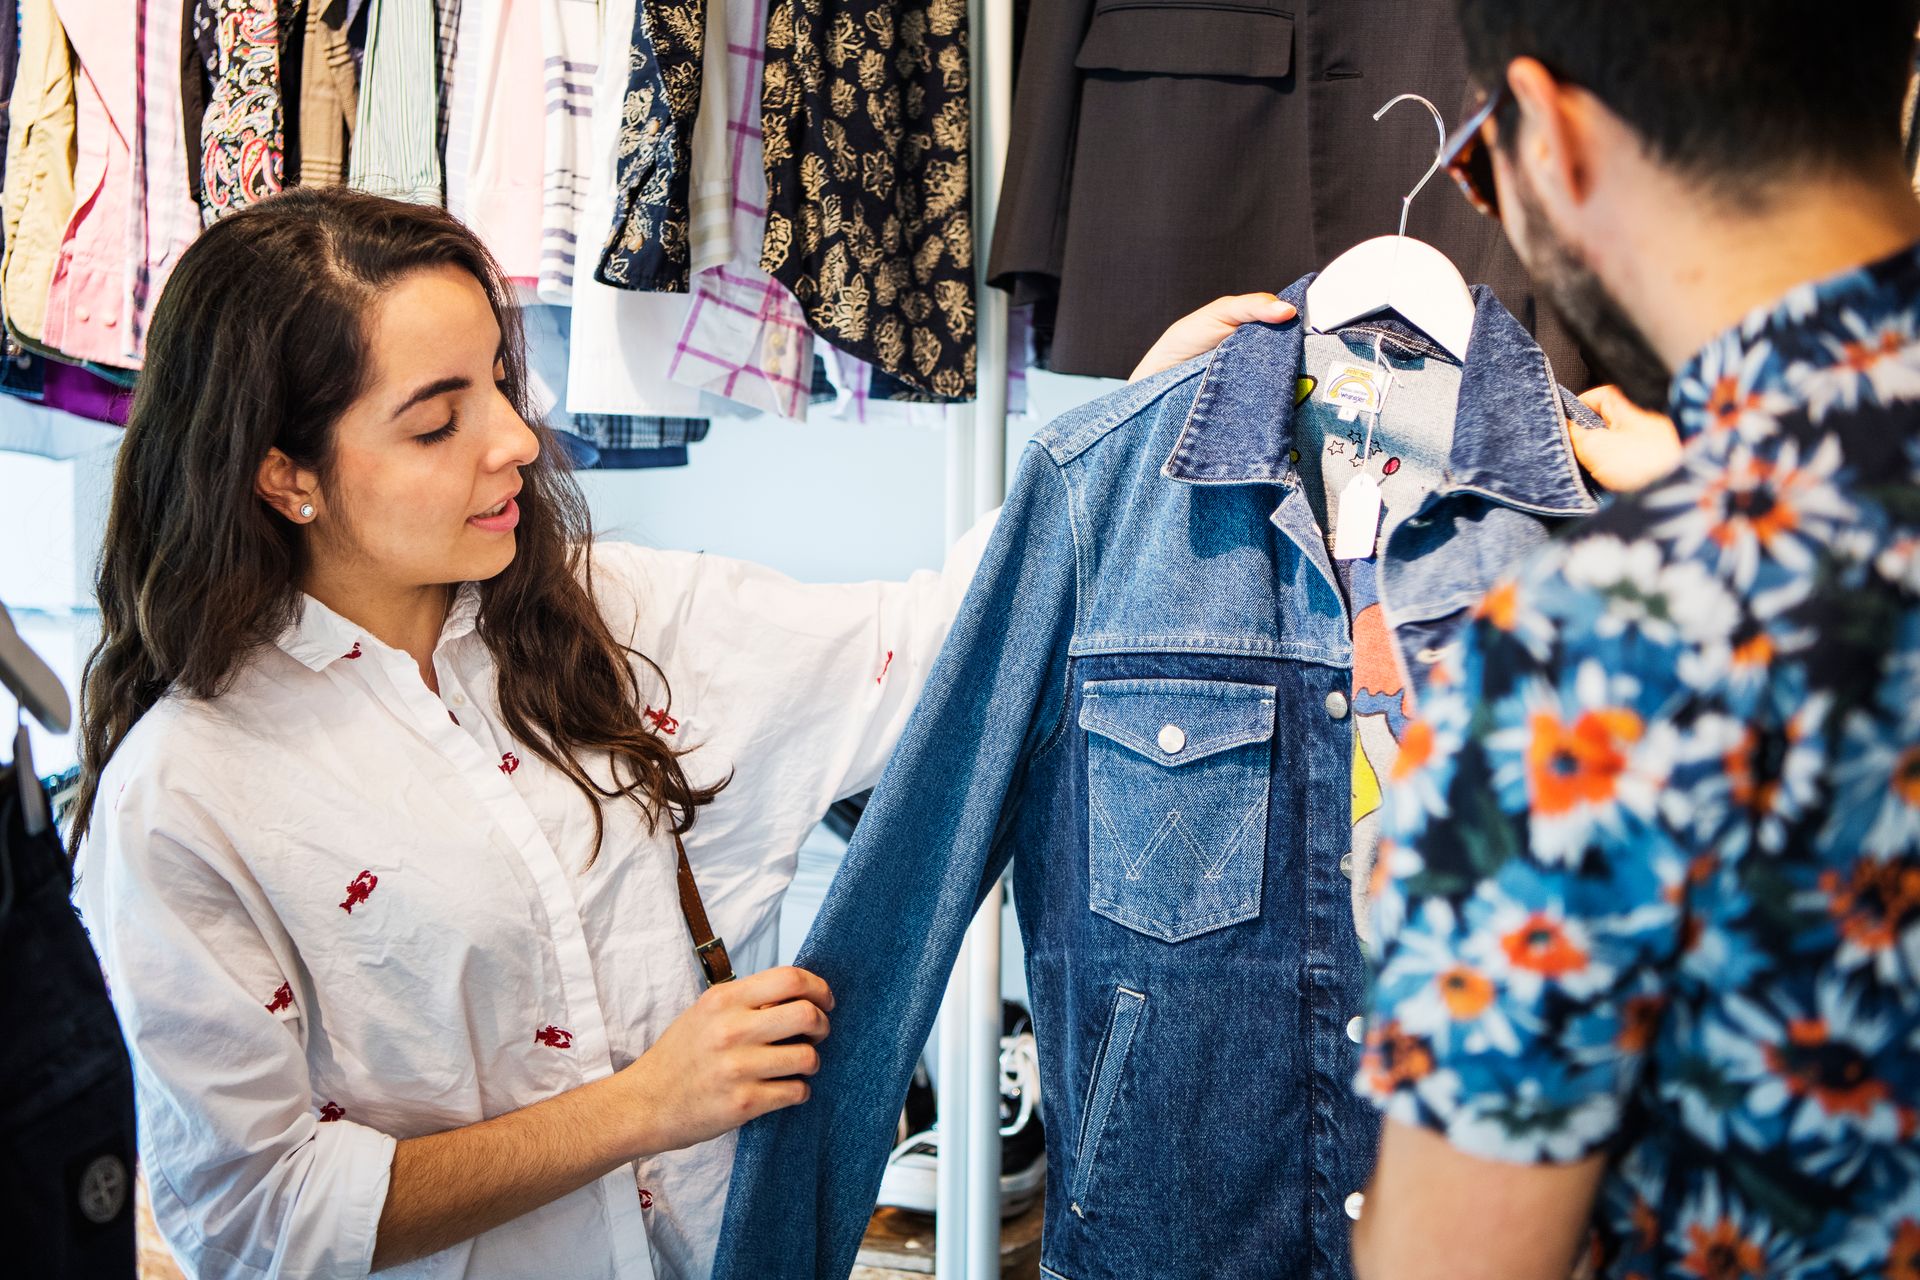 In a shop, a woman holds up a denim shirt to a man.